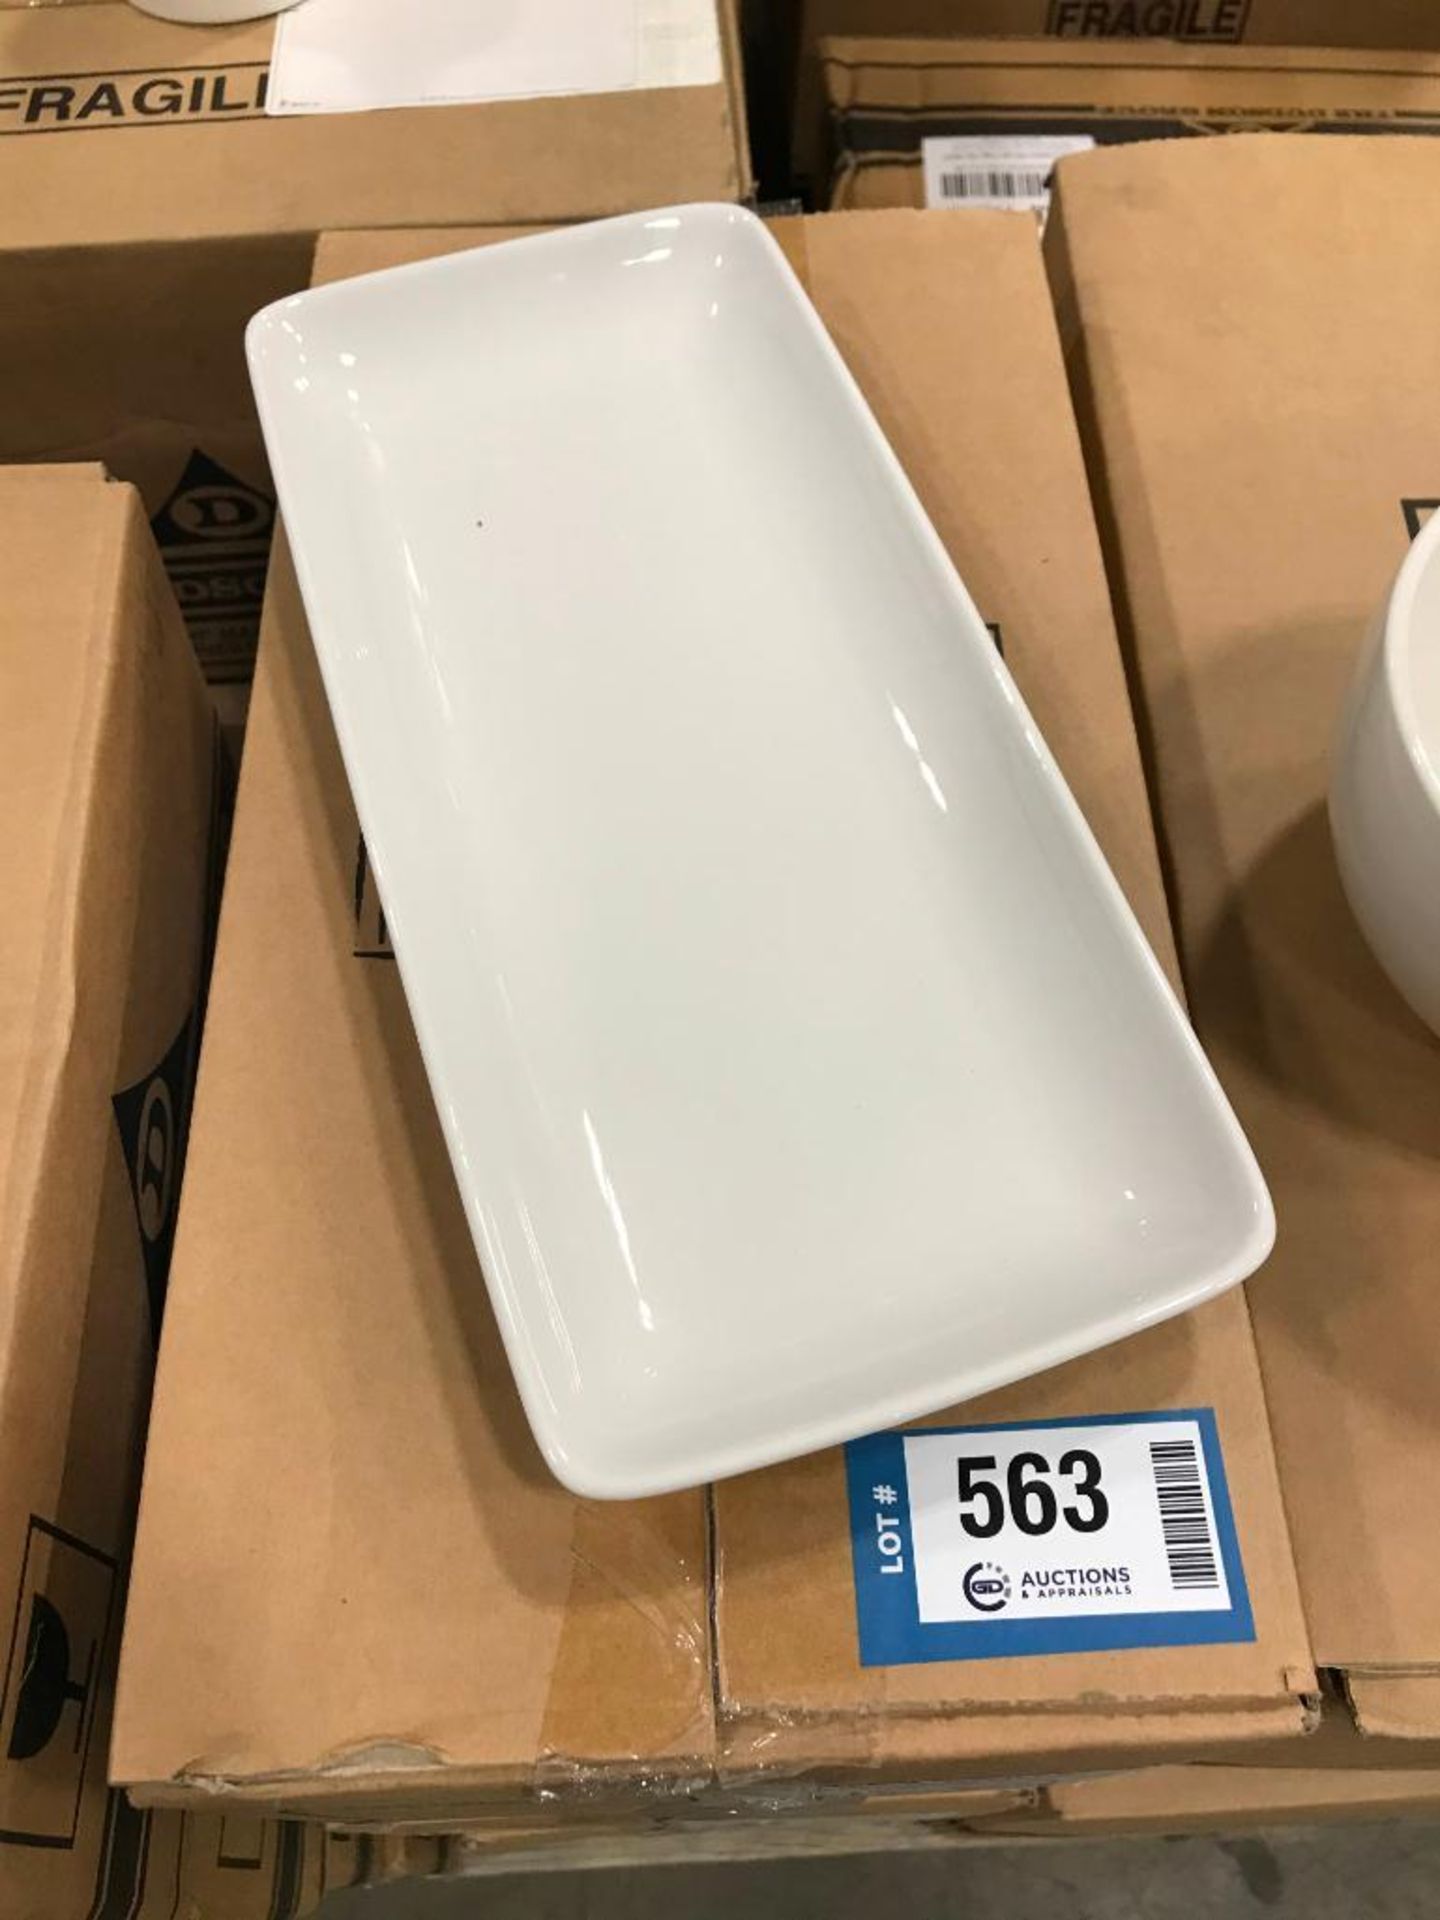 3 CASES OF DUDSON GEOMETRIX RECTANGLE CHEF'S TRAY 10 5/8" - 8/CASE, MADE IN ENGLAND - Image 2 of 5